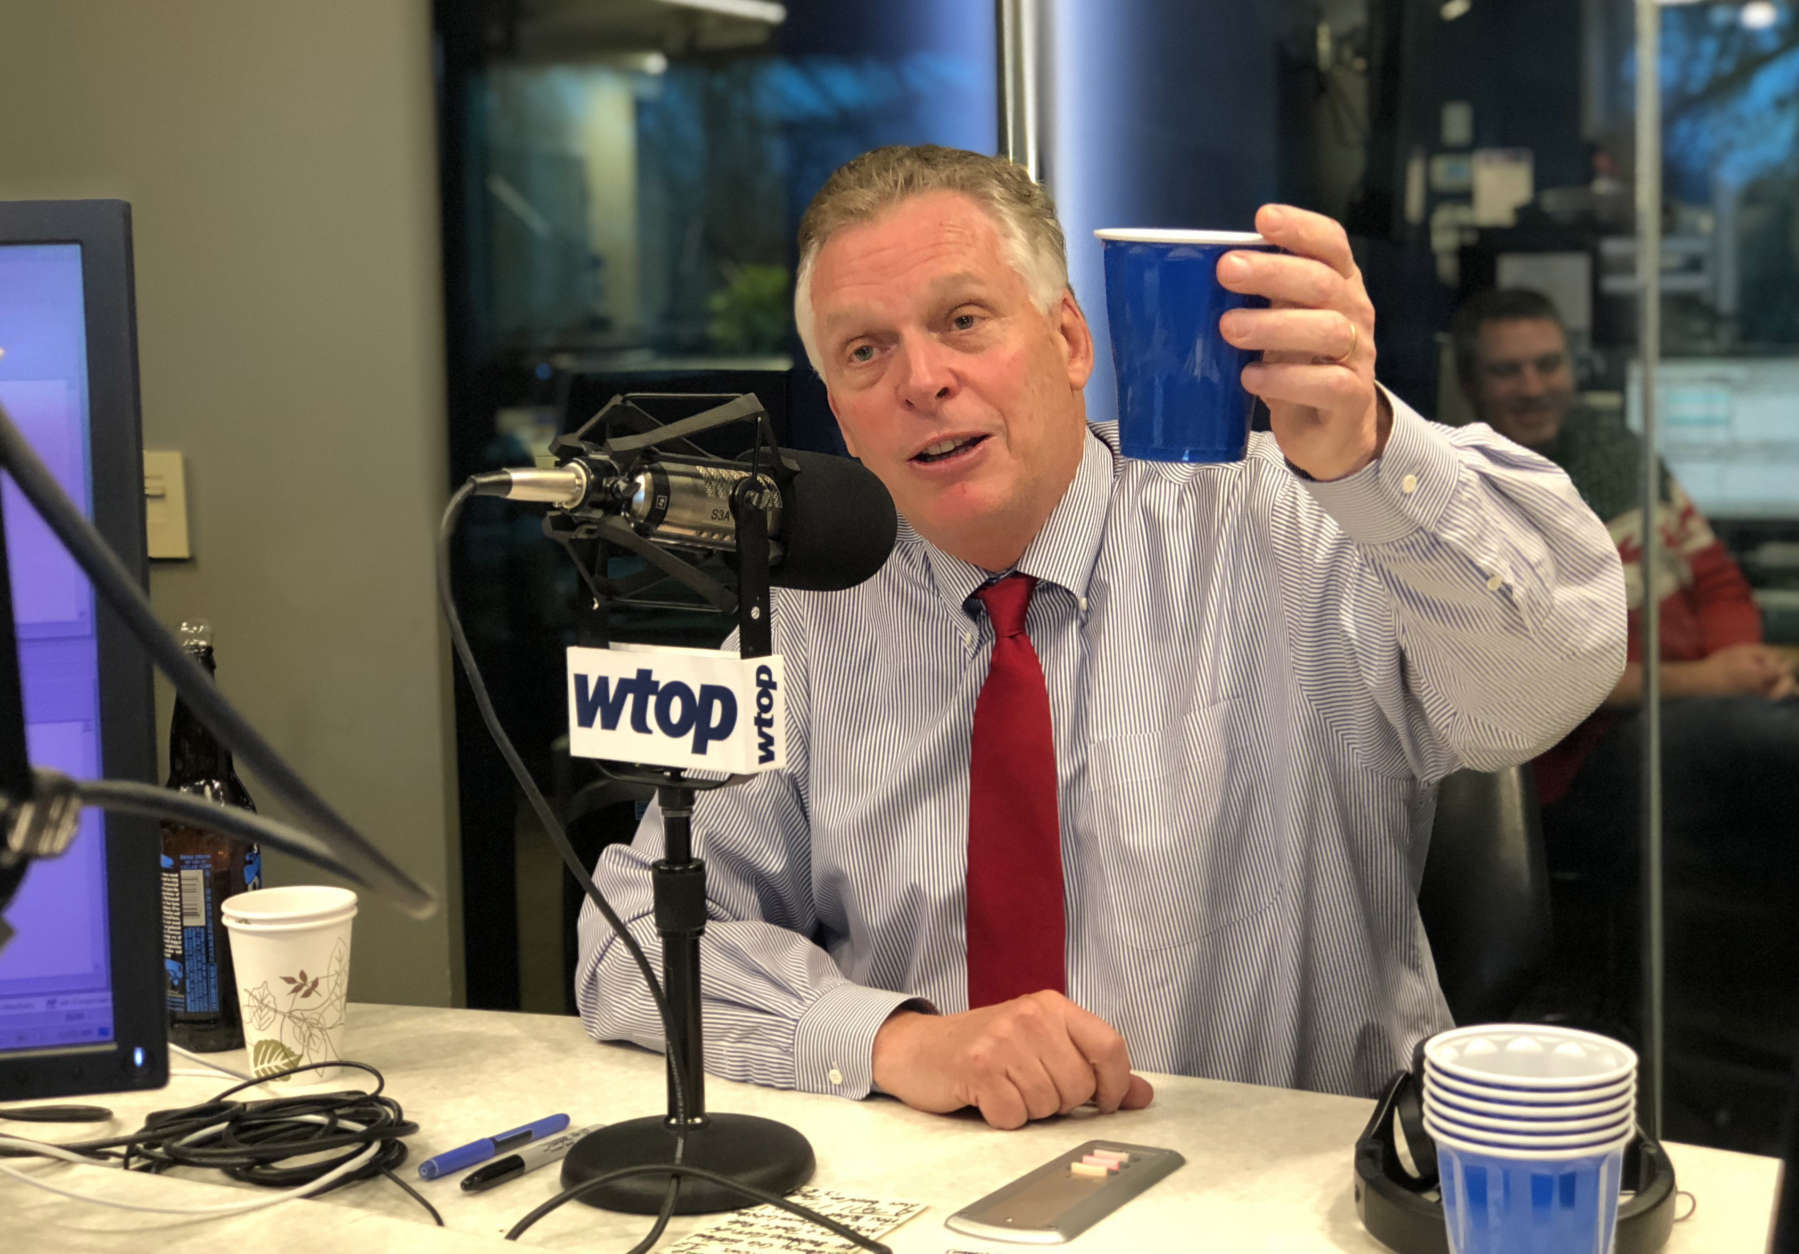 Virginia Gov. Terry McAuliffe raises a glass of beer in the Glass Enclosed Nerve Center during an interview on WTOP on Friday, Dec. 22, 2017. He helped select the ingredients for the stout, a collaboration with Virginia breweries Stone, Hardywood and Ardent. (WTOP/Omama Altaleb)